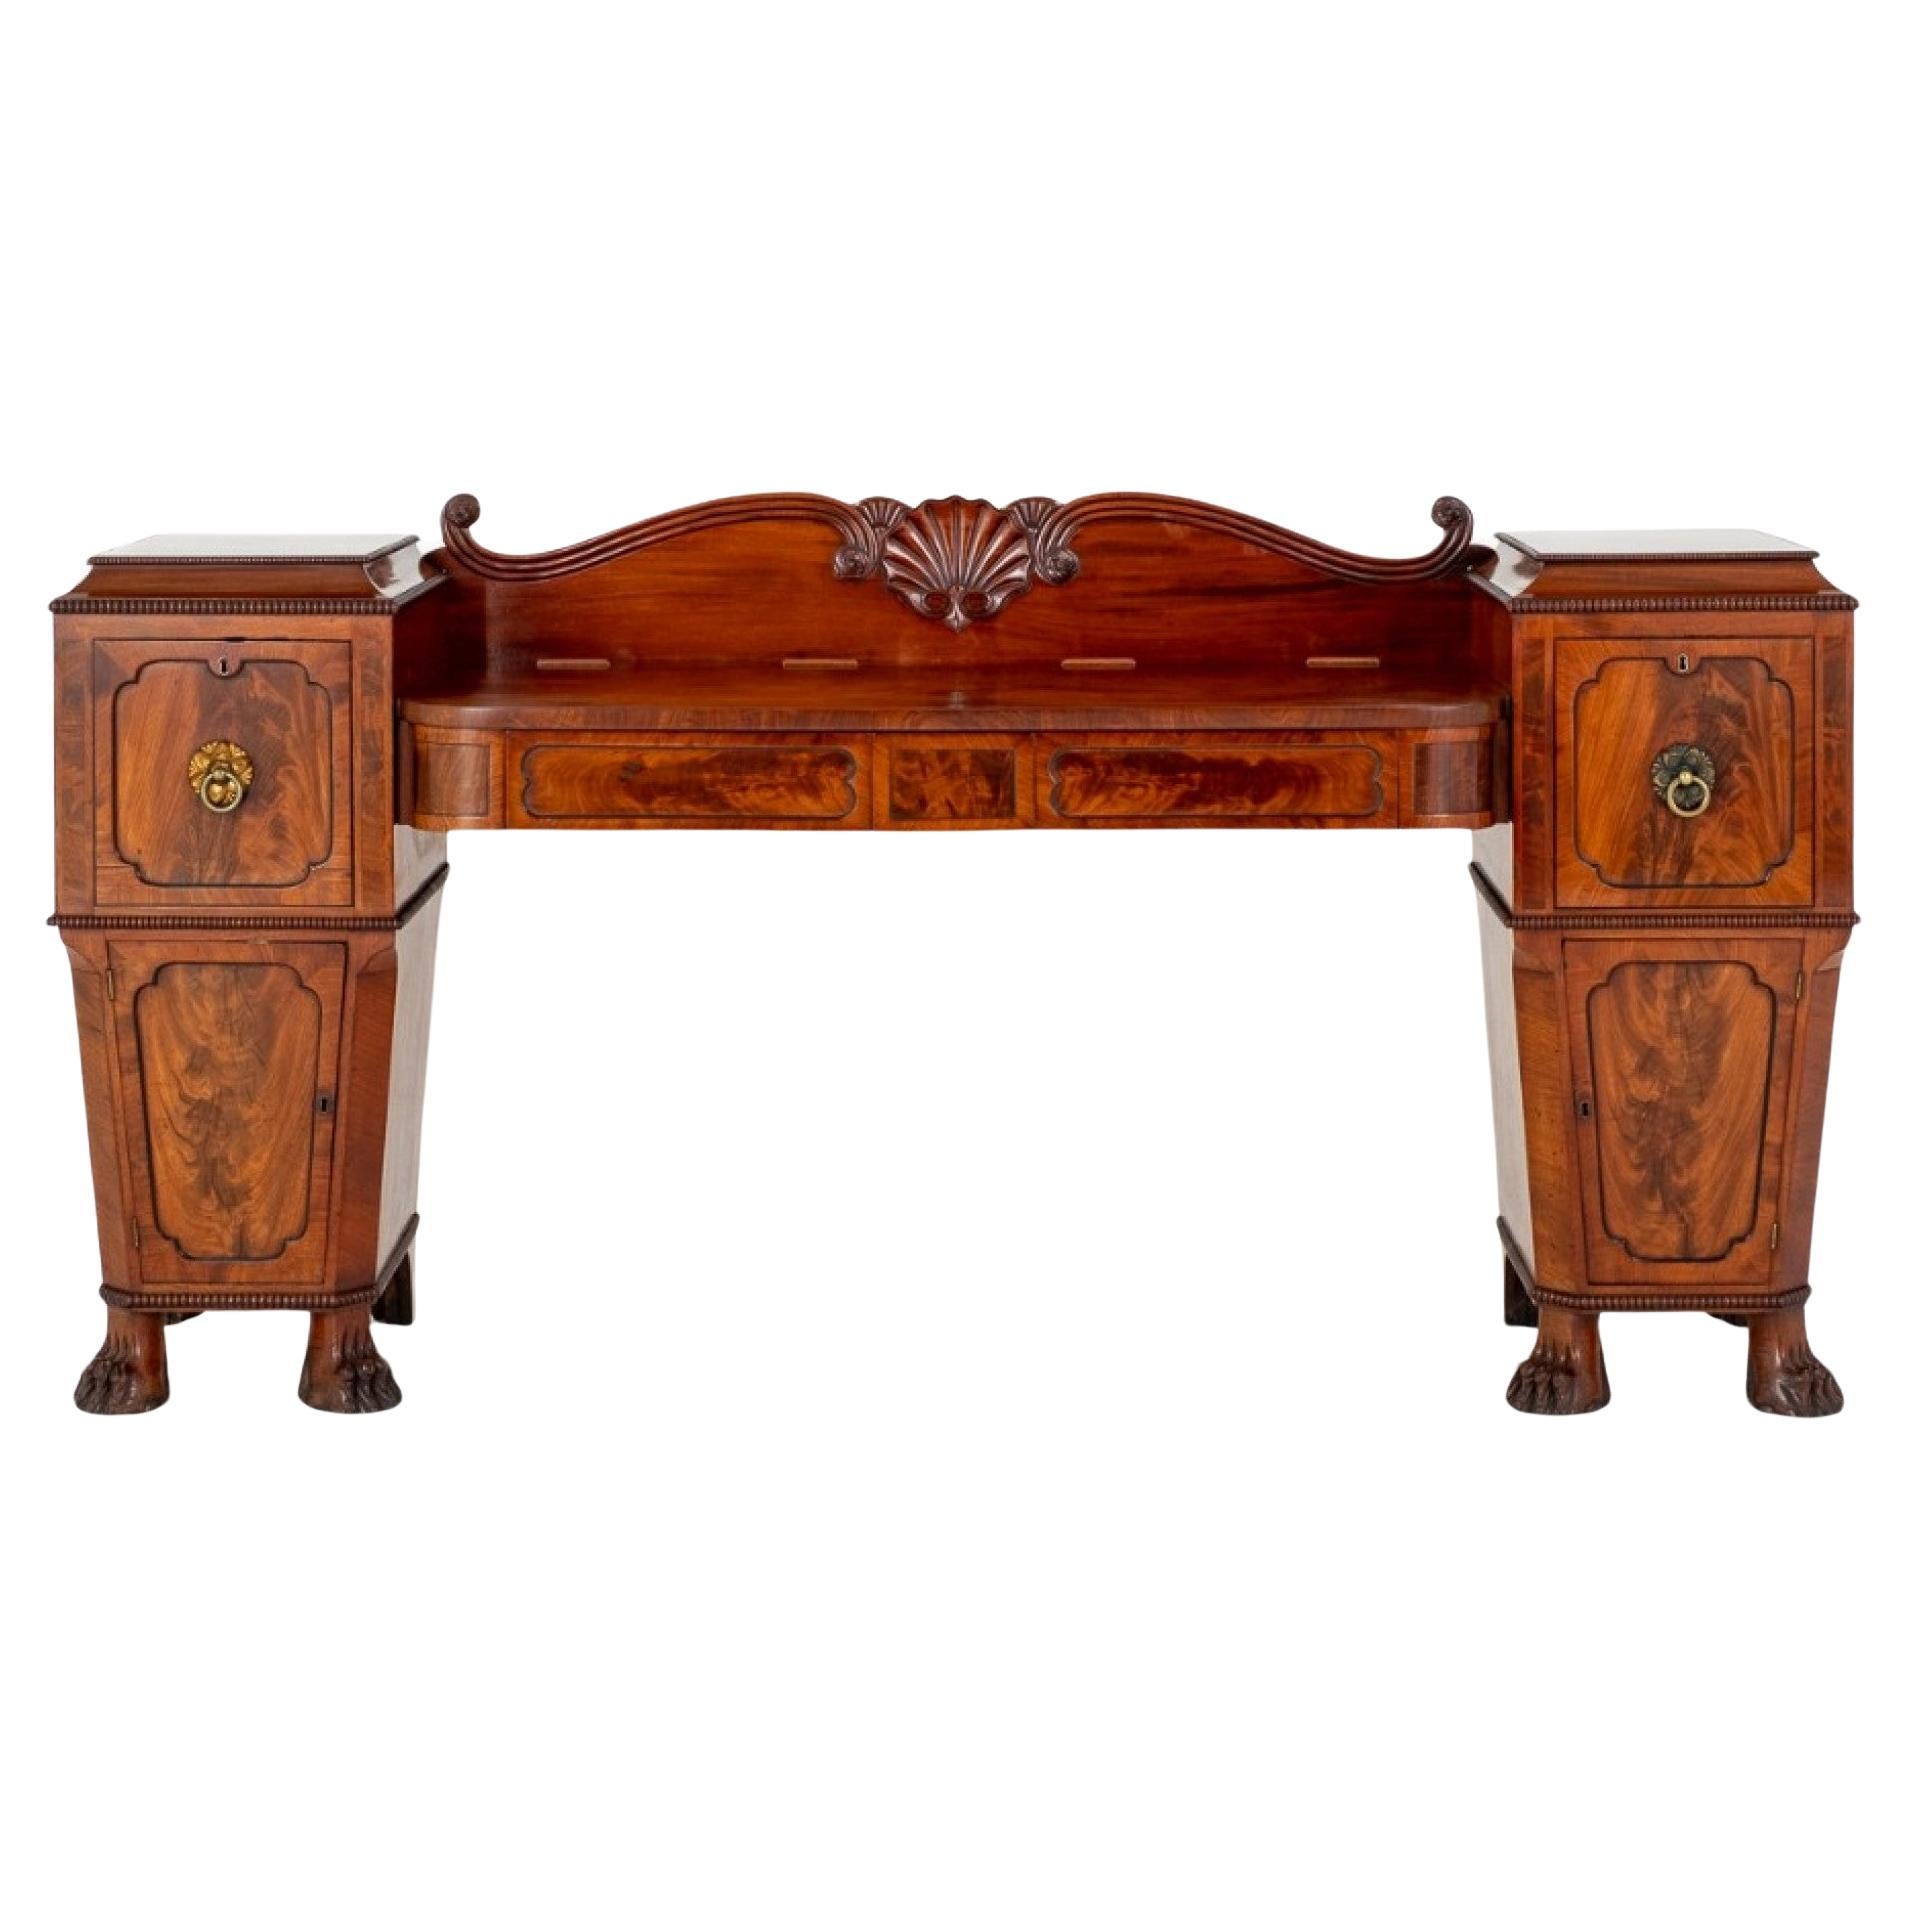 Period Regency Sideboard Antique Mahogany Buffet For Sale